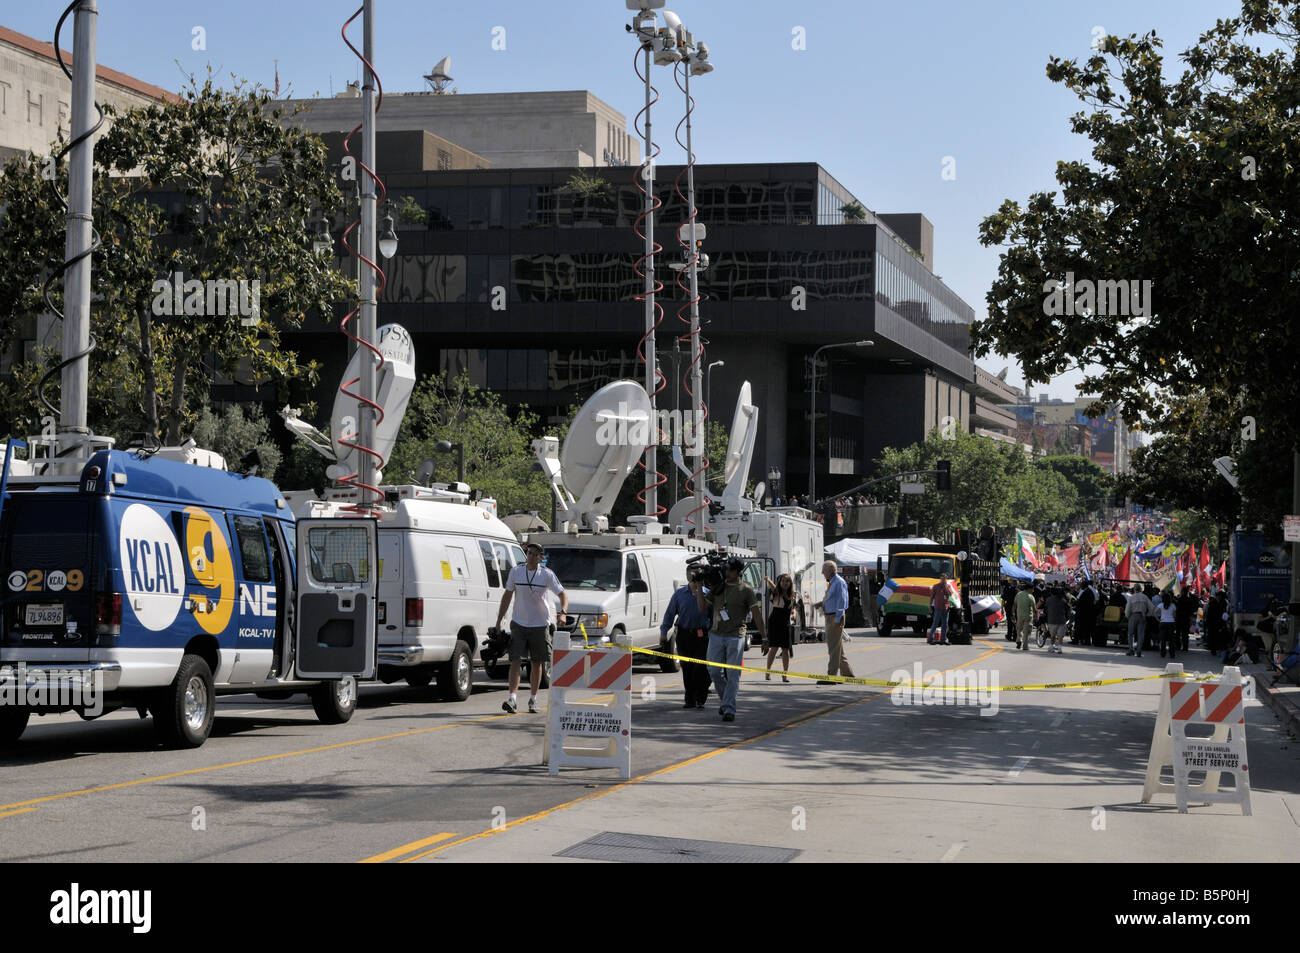 Police officers of the Los Angeles Police Department watch from a distance the ongoing May 1 demonstrations in Los Angeles Stock Photo